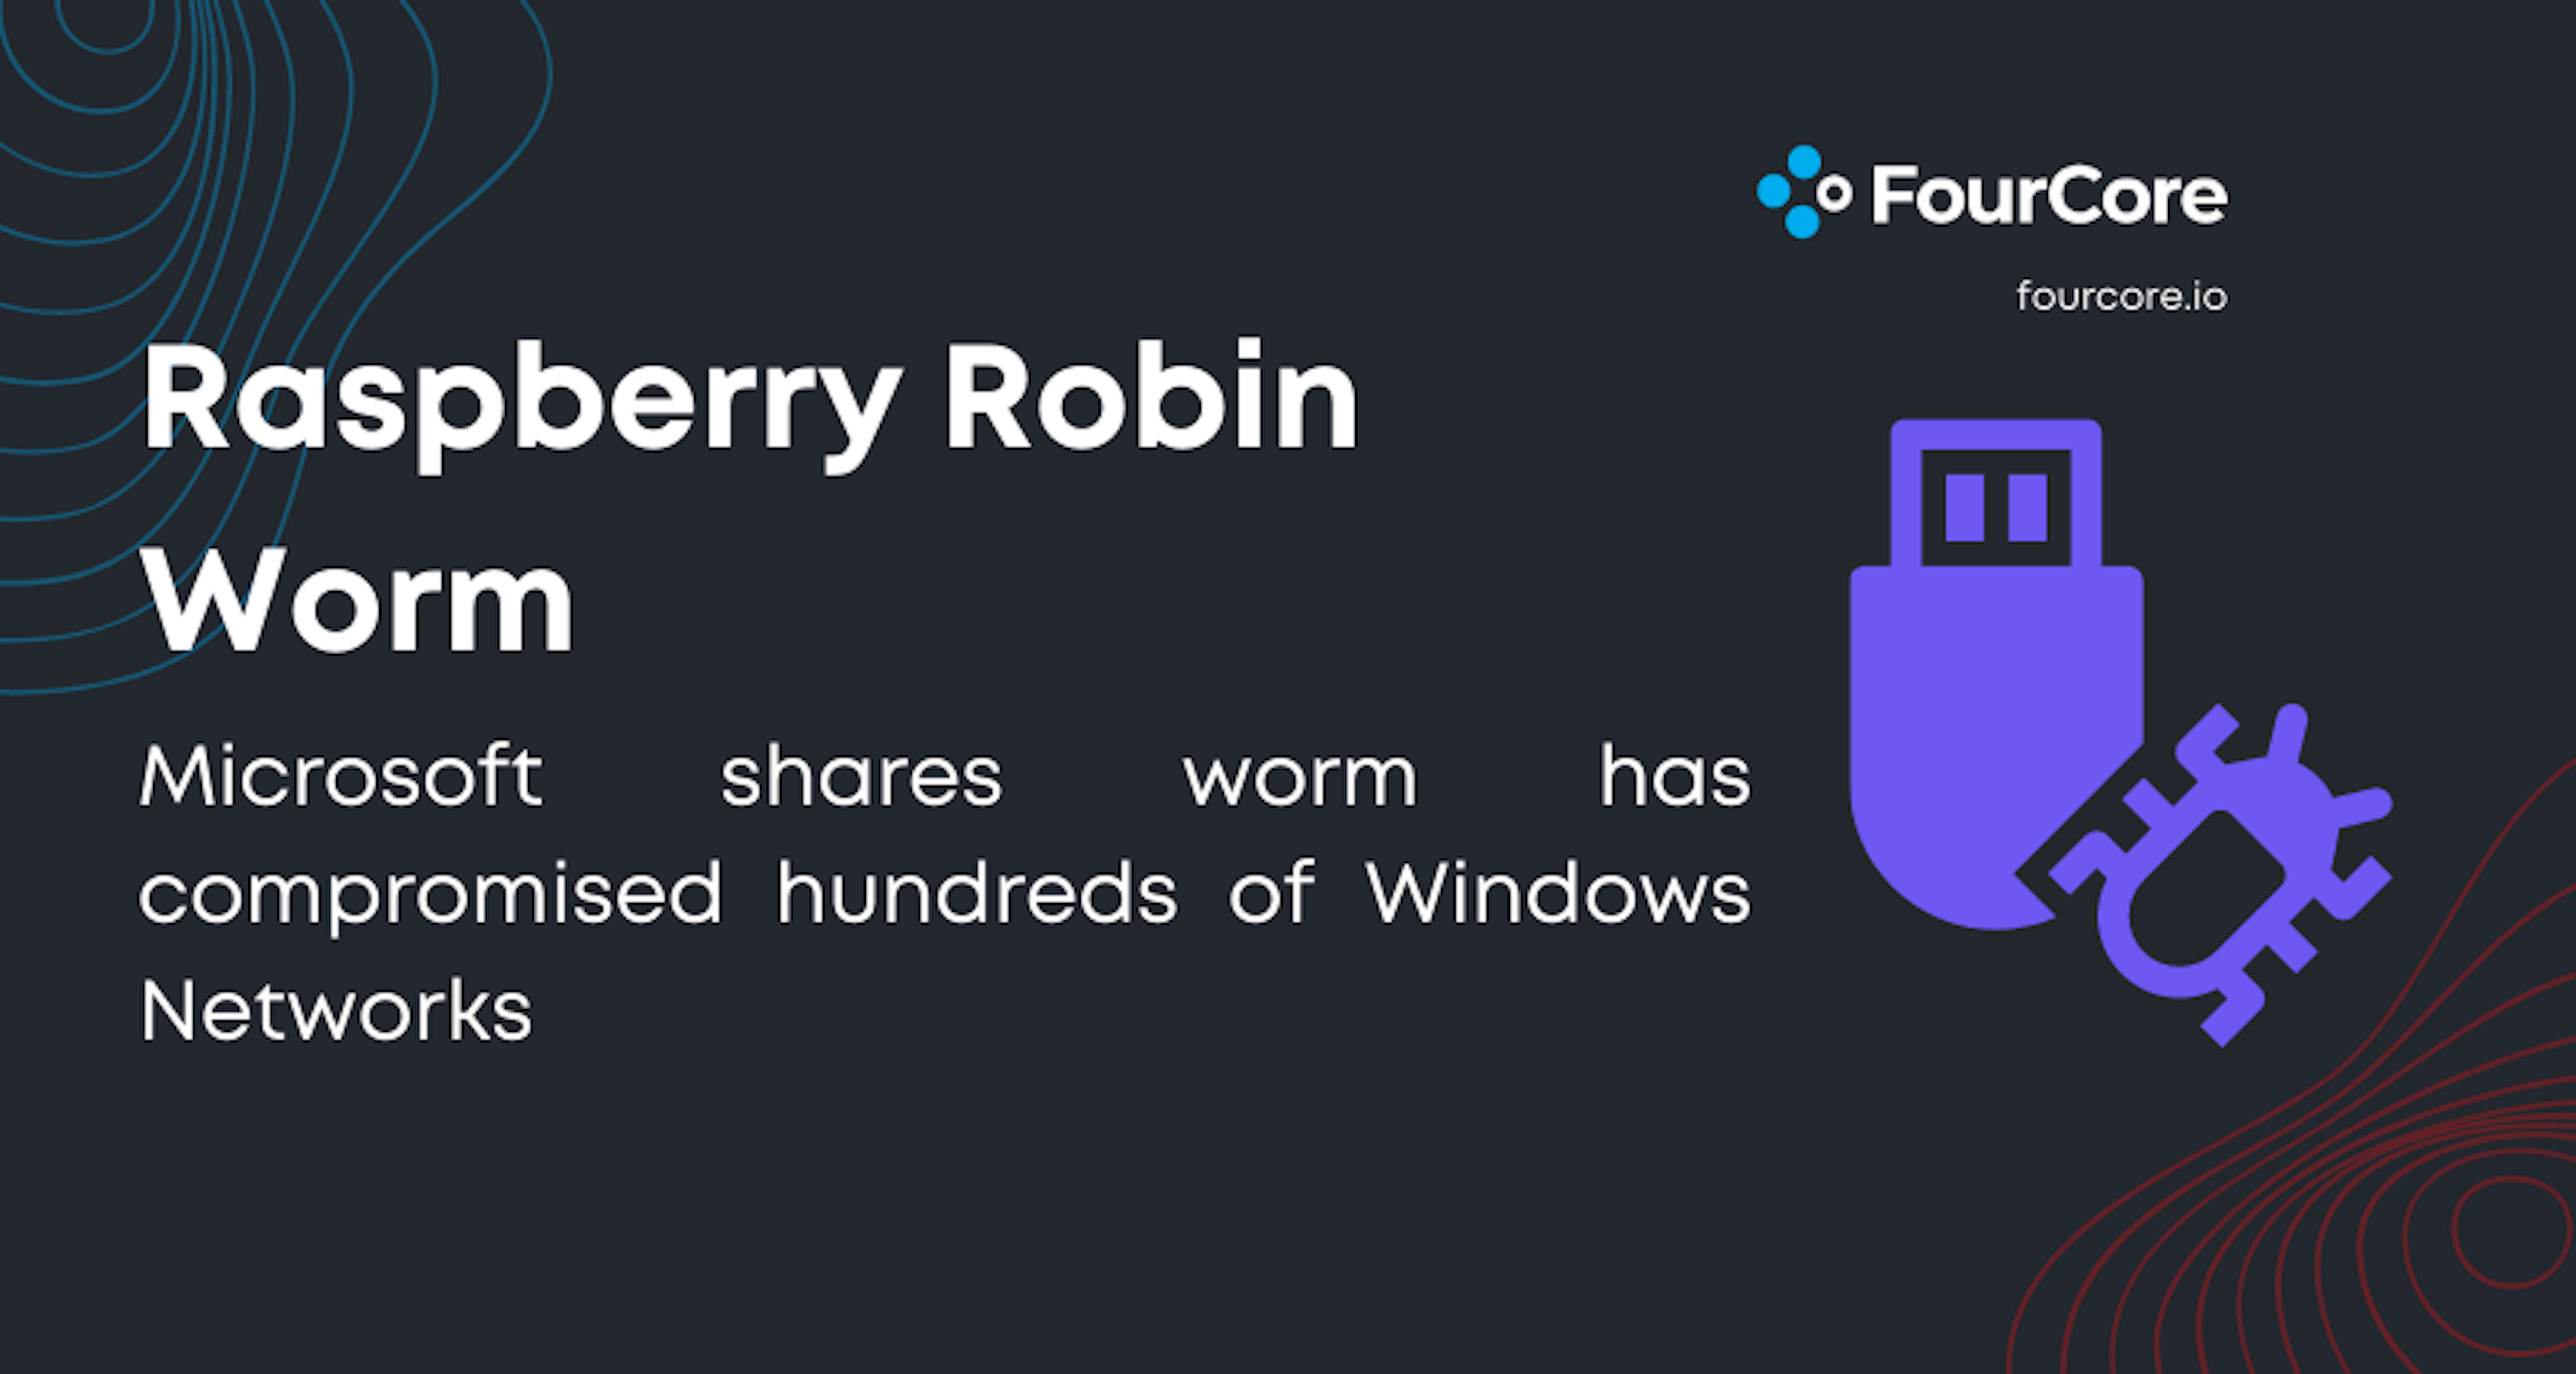 Raspberry Robin Worm infecting hundreds of Windows networks - Detection Sigma Rules Blog Post Image